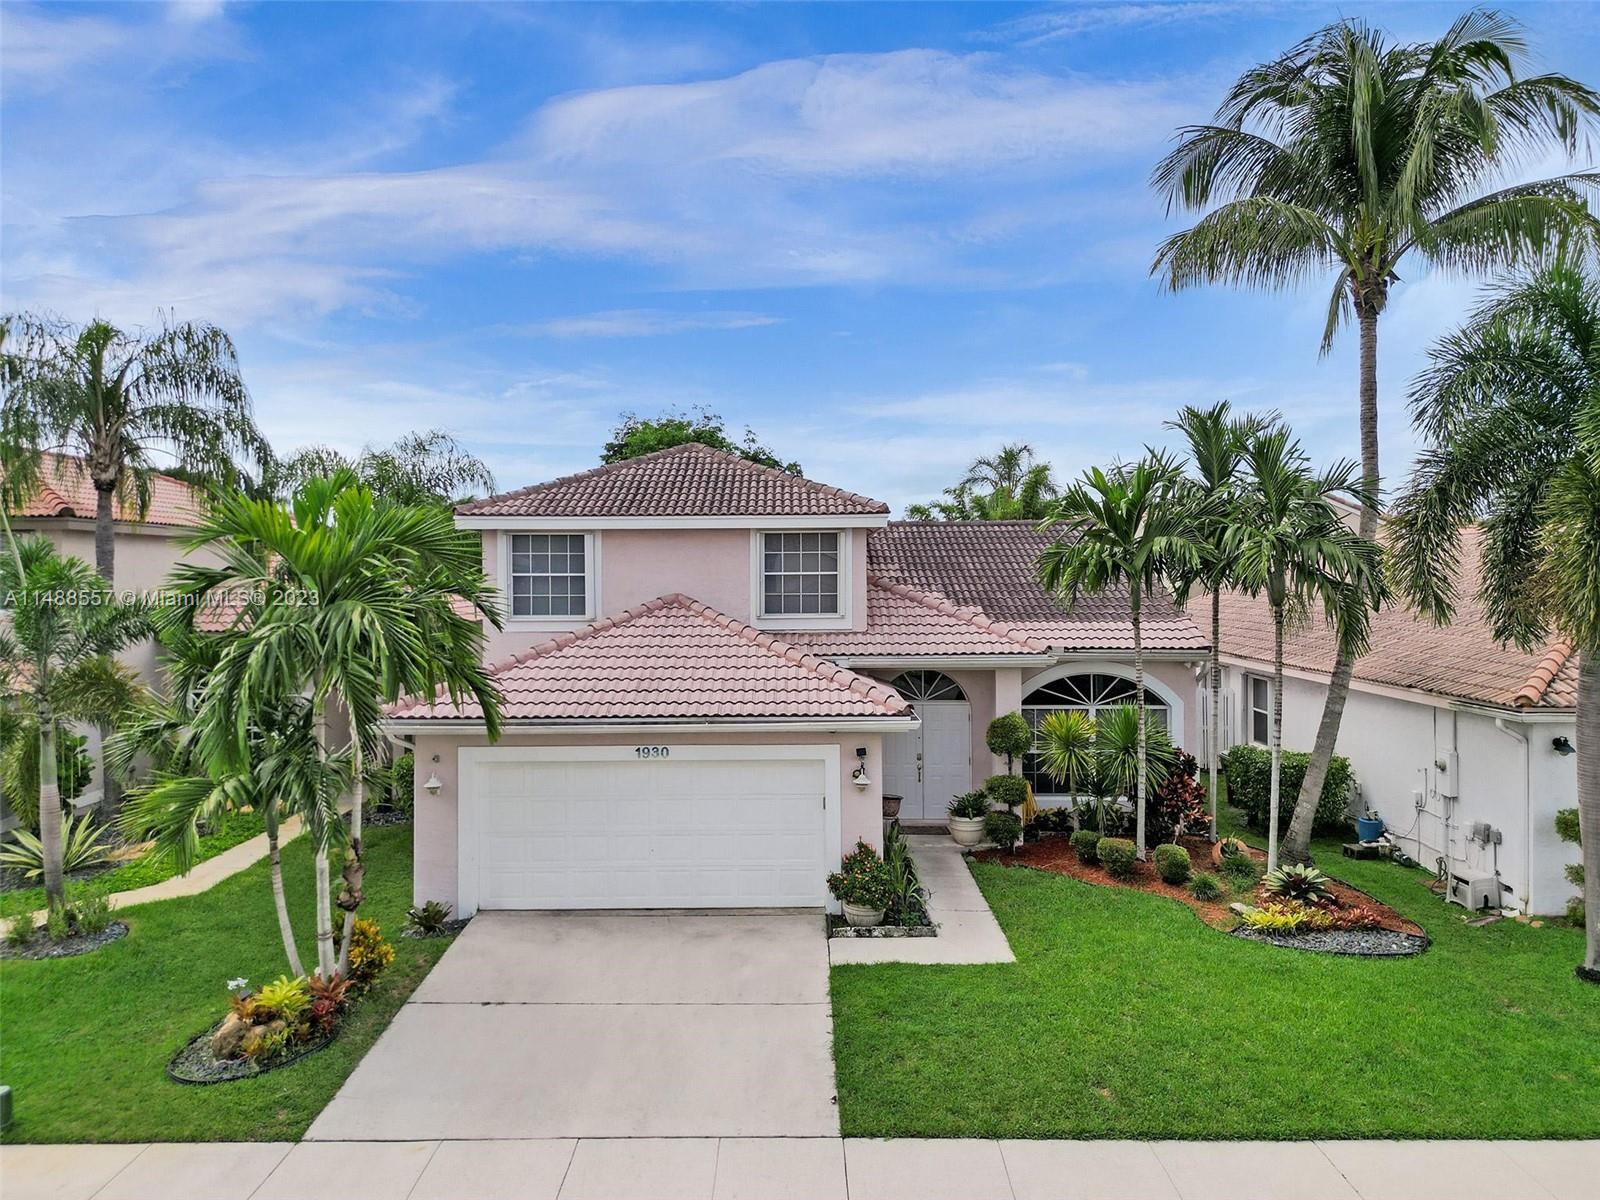 1930 Nw 182nd Ter Ter, Pembroke Pines, Miami-Dade County, Florida - 4 Bedrooms  
3 Bathrooms - 